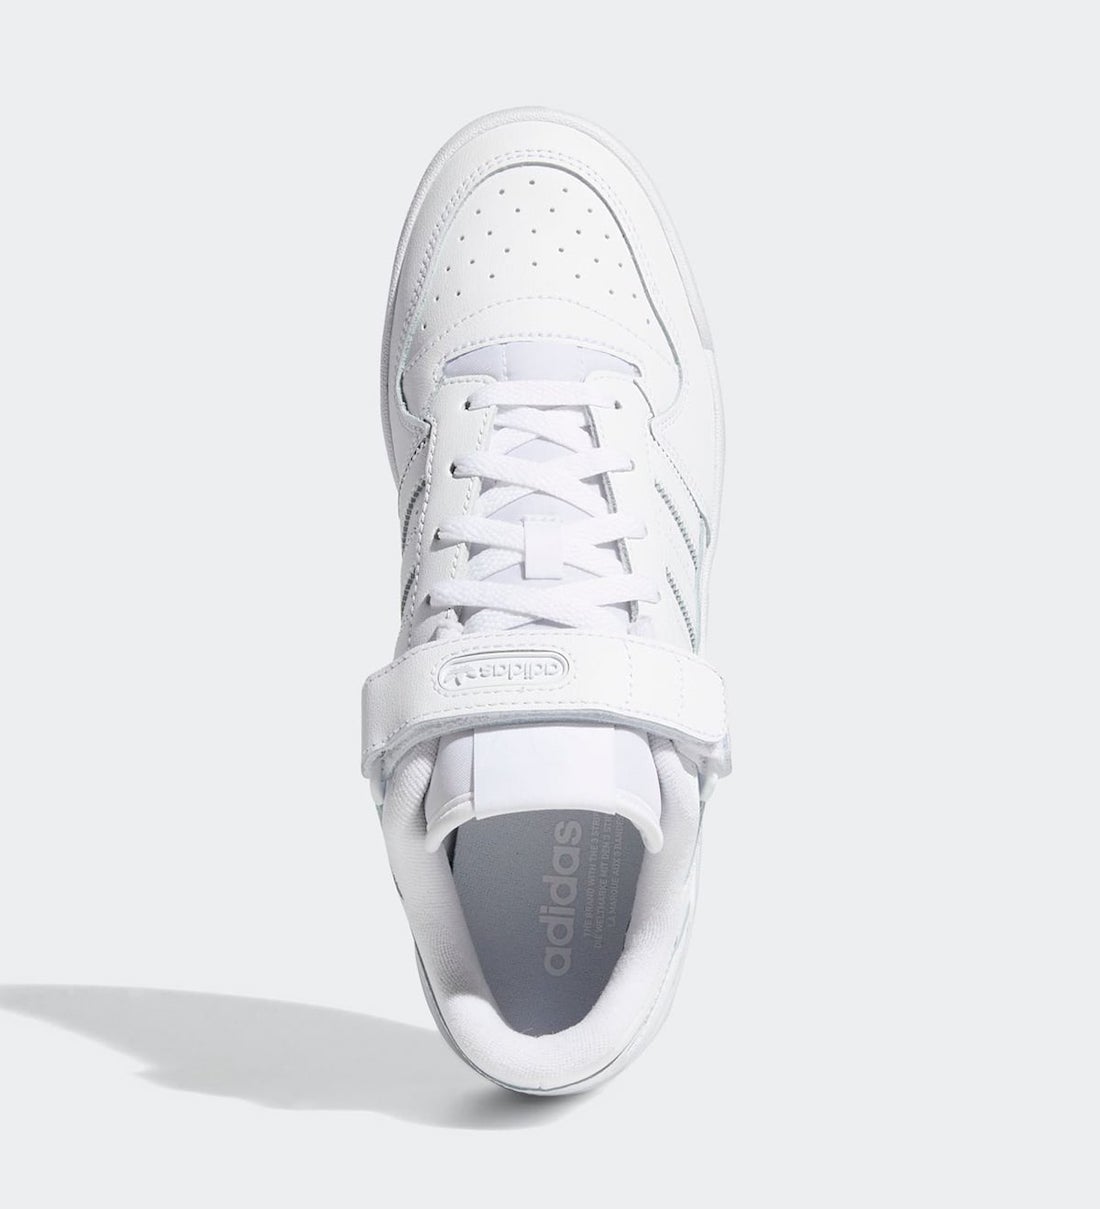 adidas Forum Low Triple White FY7755 Release Date